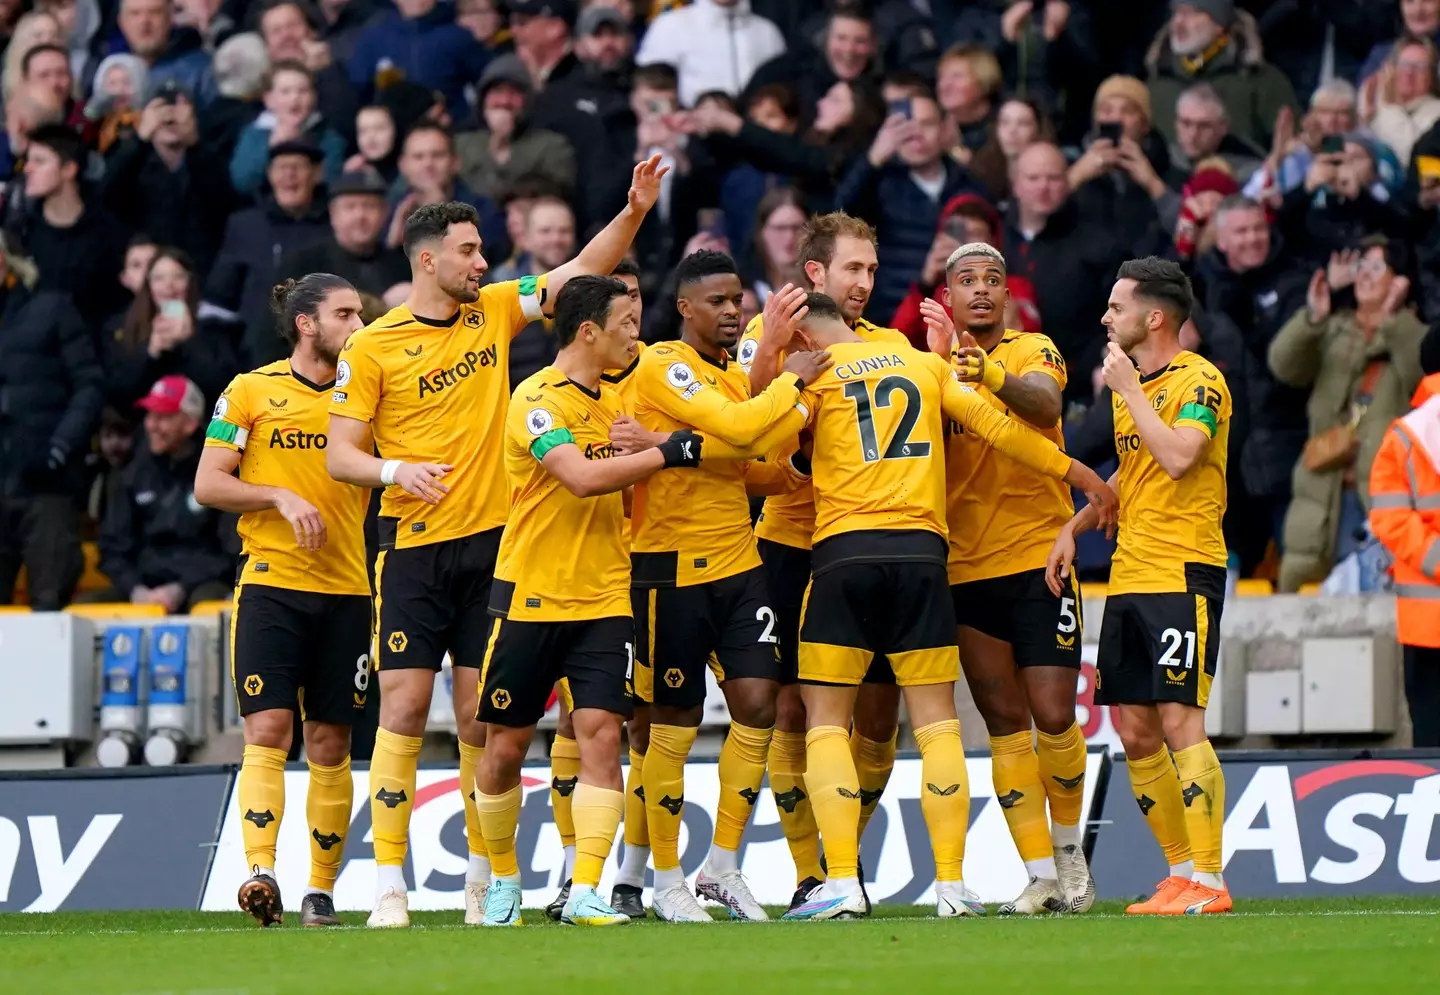 Wolves players celebrate Dawson's goal. (Image